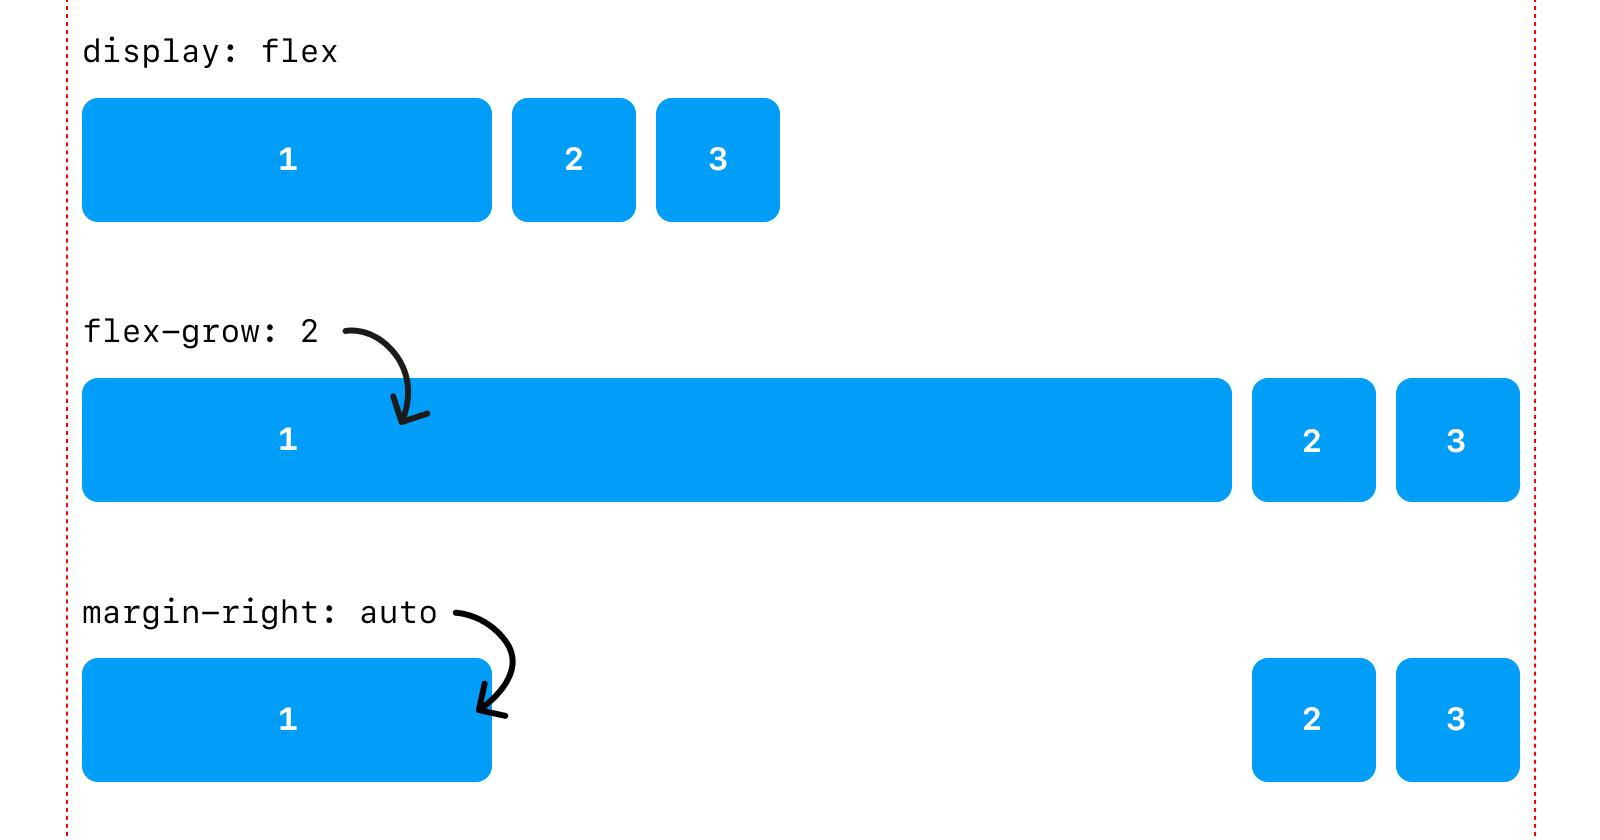 Illustration showing three flexbox layouts. The first is normal `display: flex`. The second shows the first element with a `grow: 2` rule making it fill the remaining space in its container. The third shows the first element with `margin: auto` making the space between elements become justified.